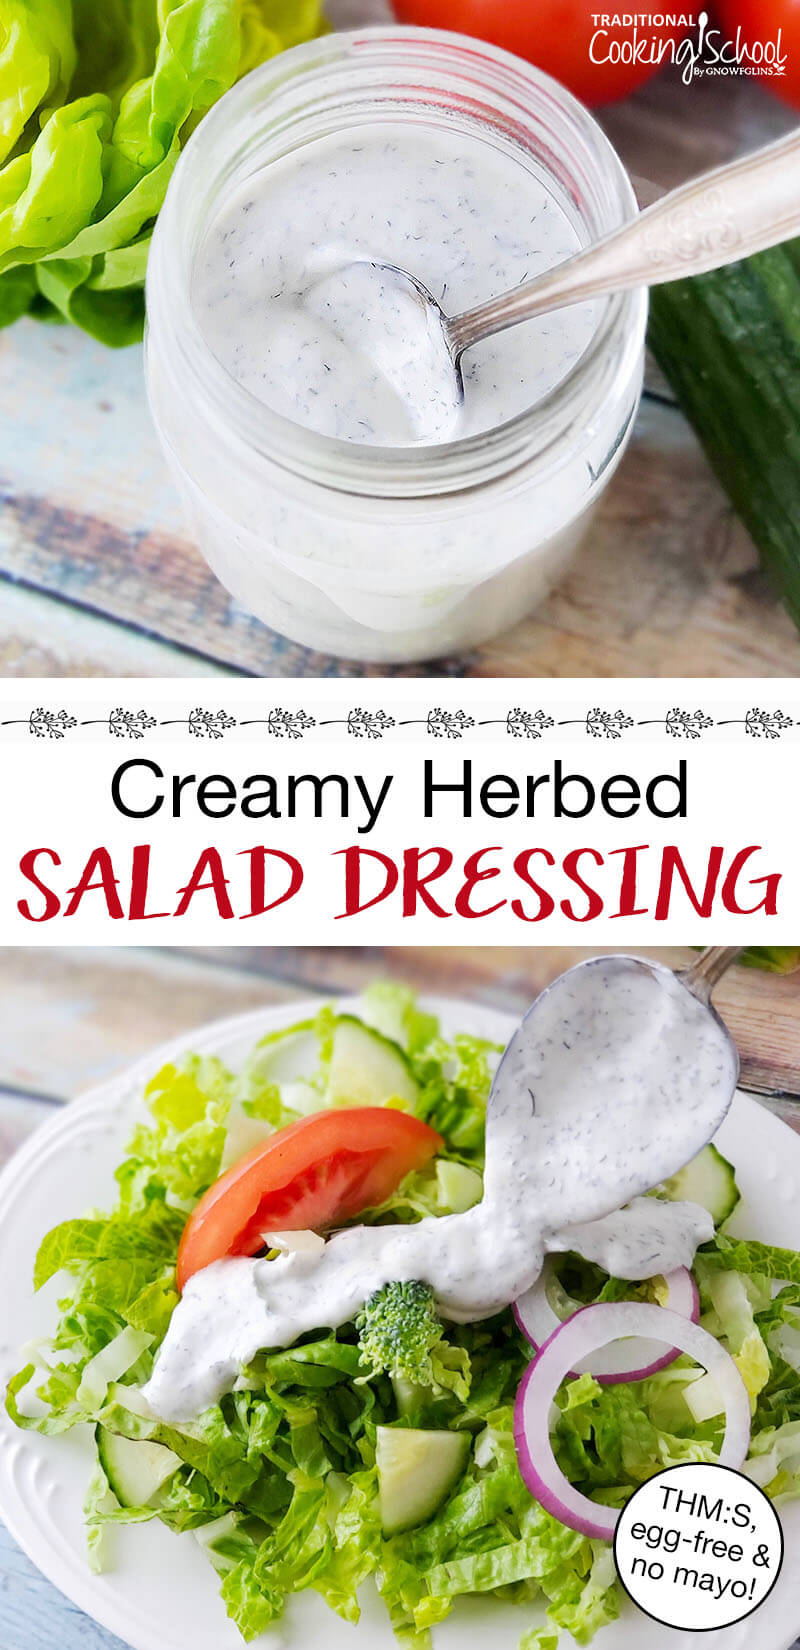 photo collage of a green salad drizzled with dressing, and a jar of dressing, with text overlay: "Creamy Herbed Salad Dressing (THM:S, egg-free, no mayo!)"